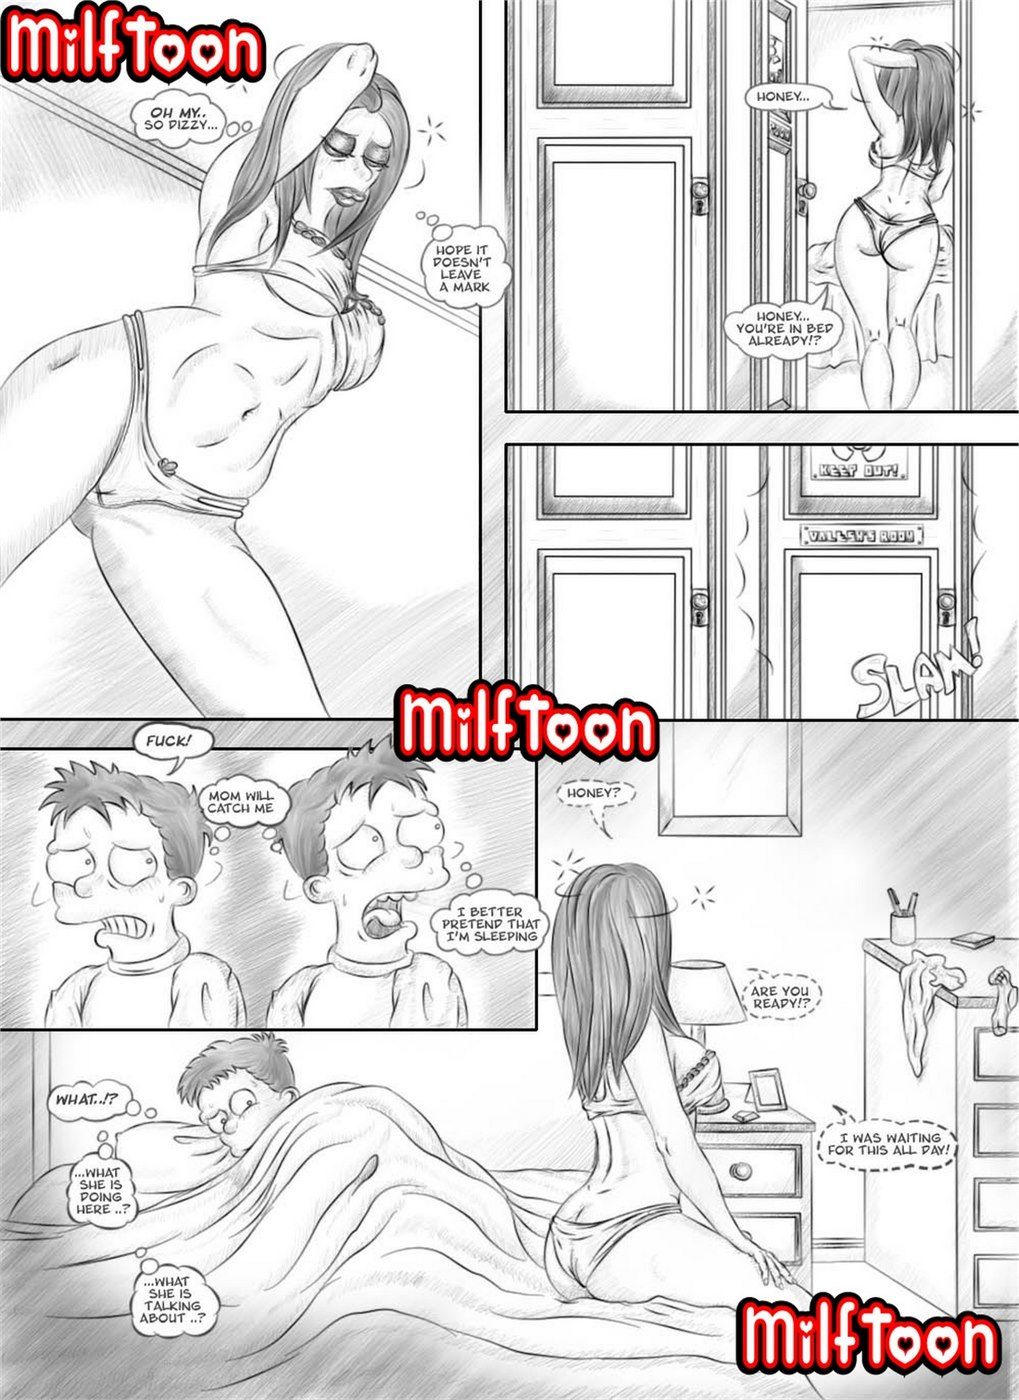 Simpsons - So big and hard,Milftoon page 4